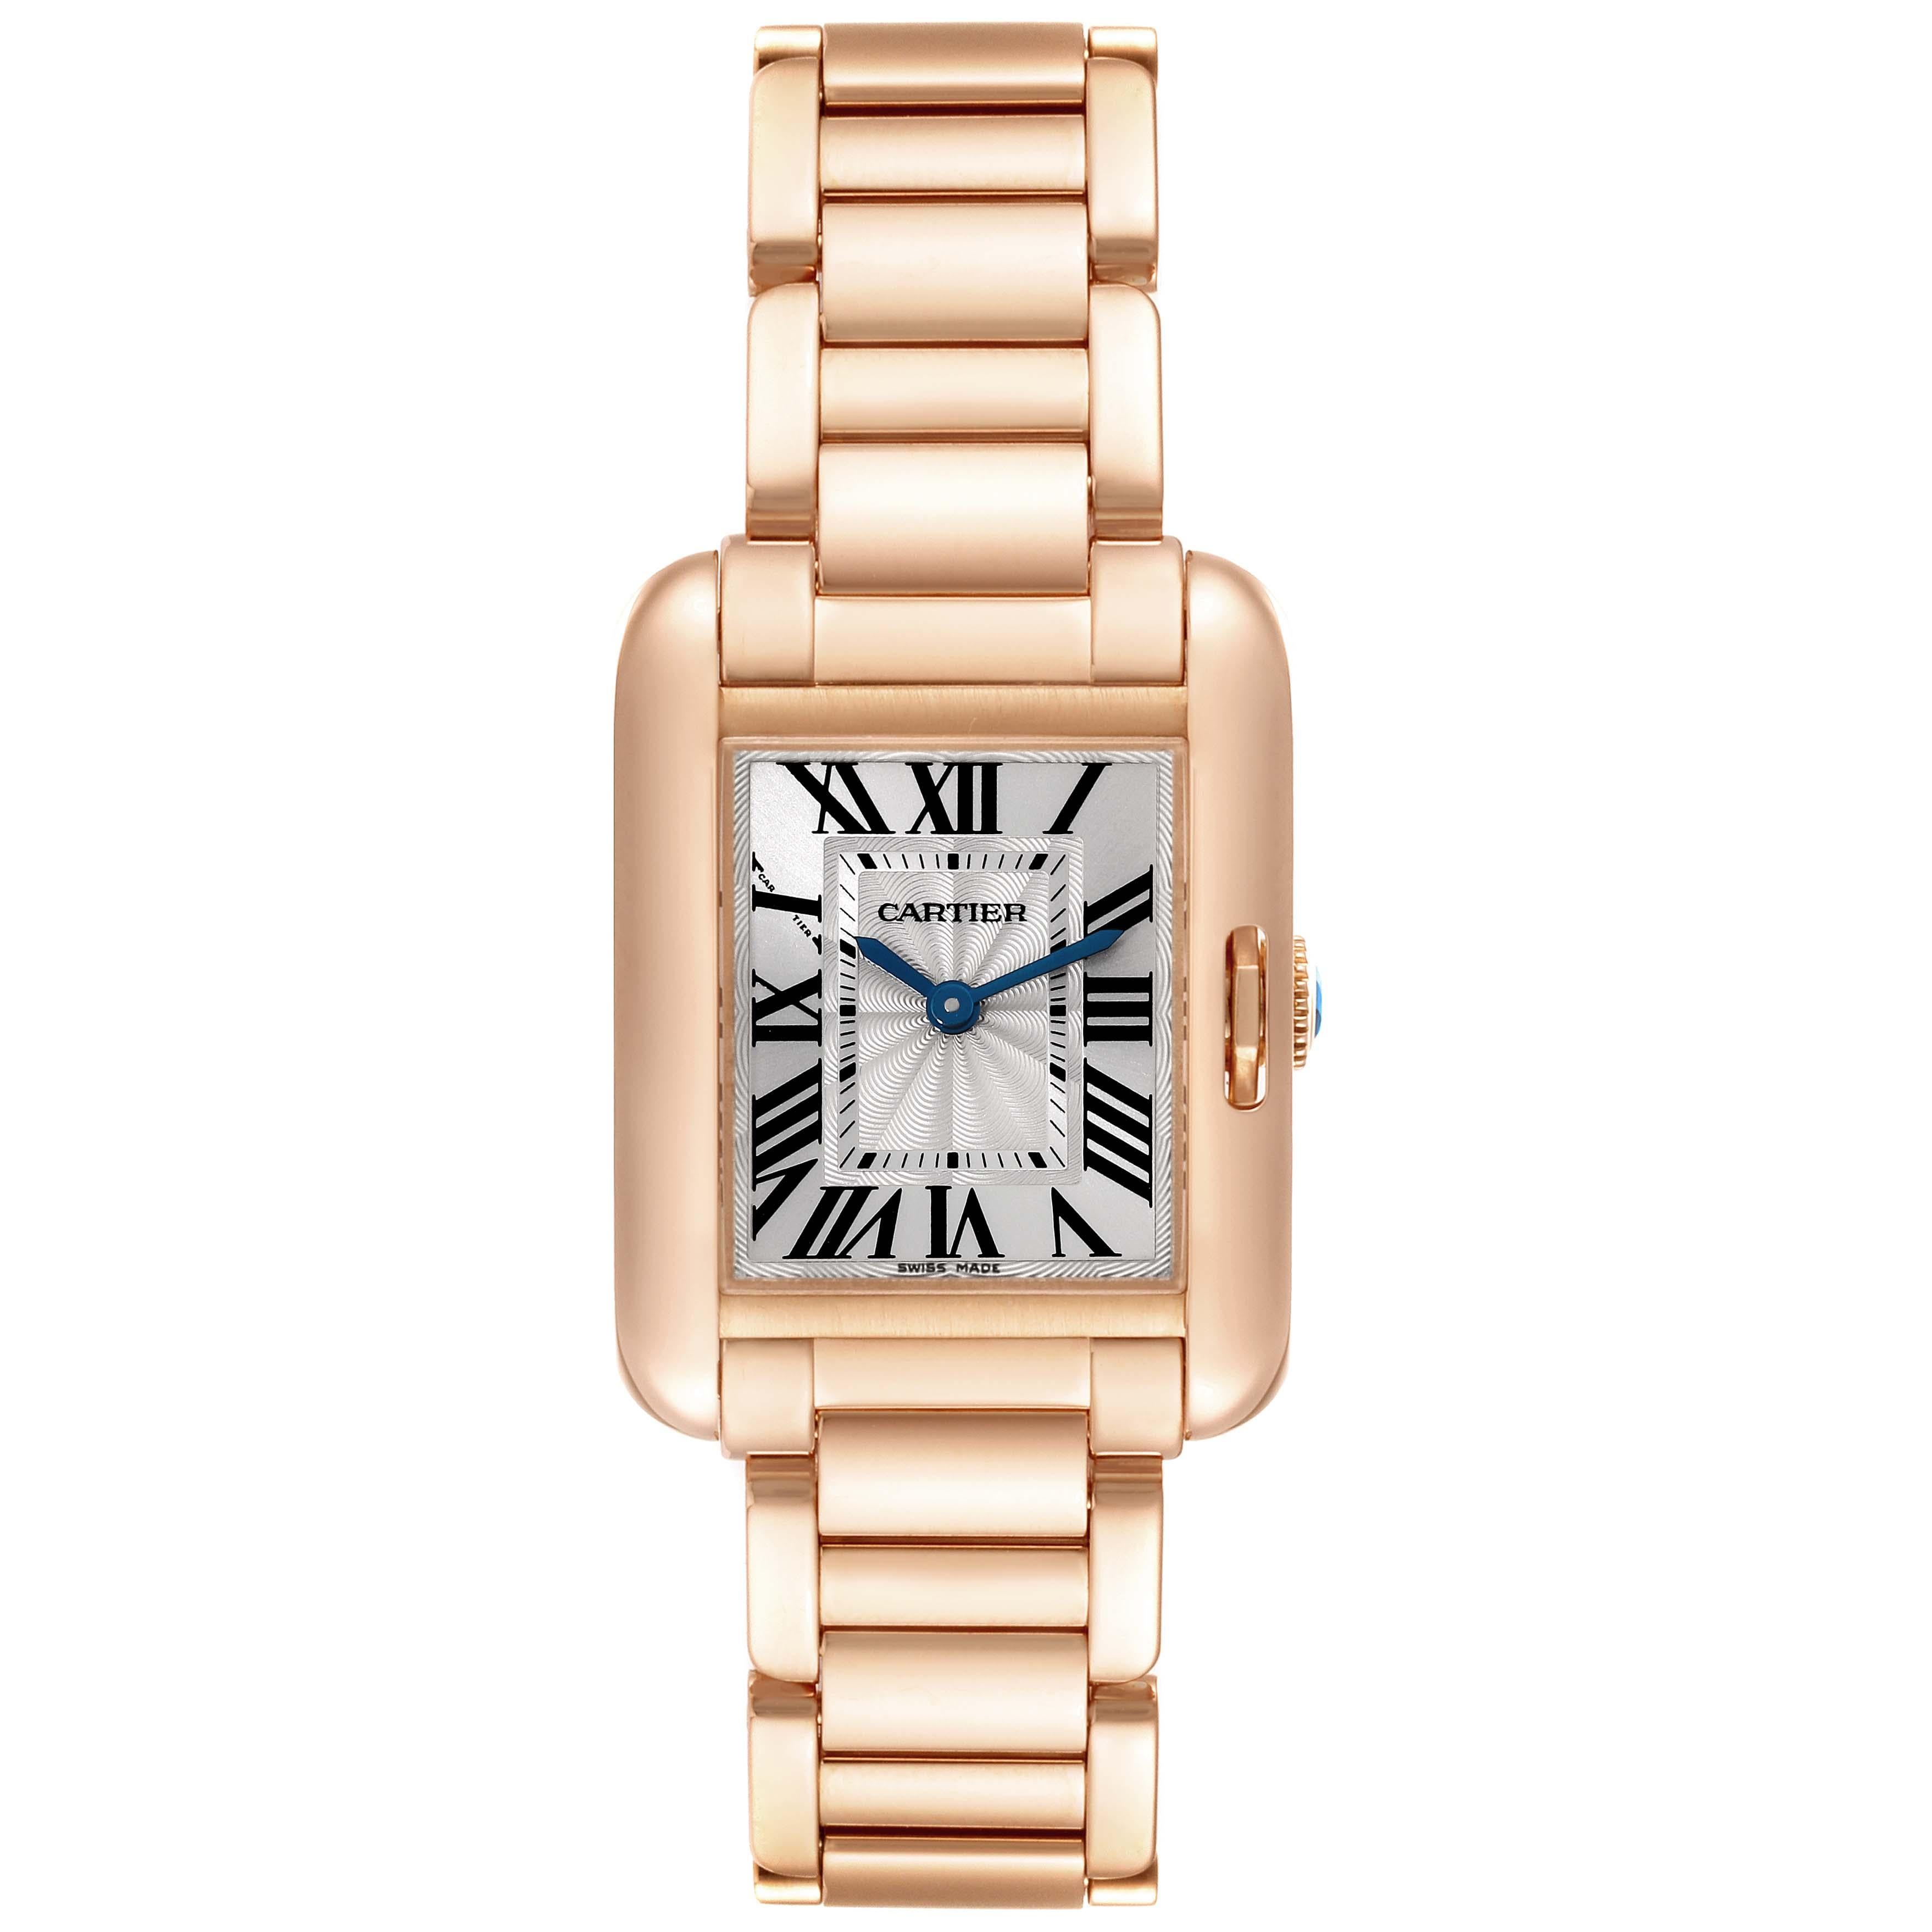 Cartier Tank Anglaise Small Silver Dial Rose Gold Ladies Watch 3580. Quartz movement. 18K rose gold case 30.2 x 22.7 mm. Circular grained crown set with the blue spinel cabochon. . Scratch resistant sapphire crystal. Flinque and silvered dial with